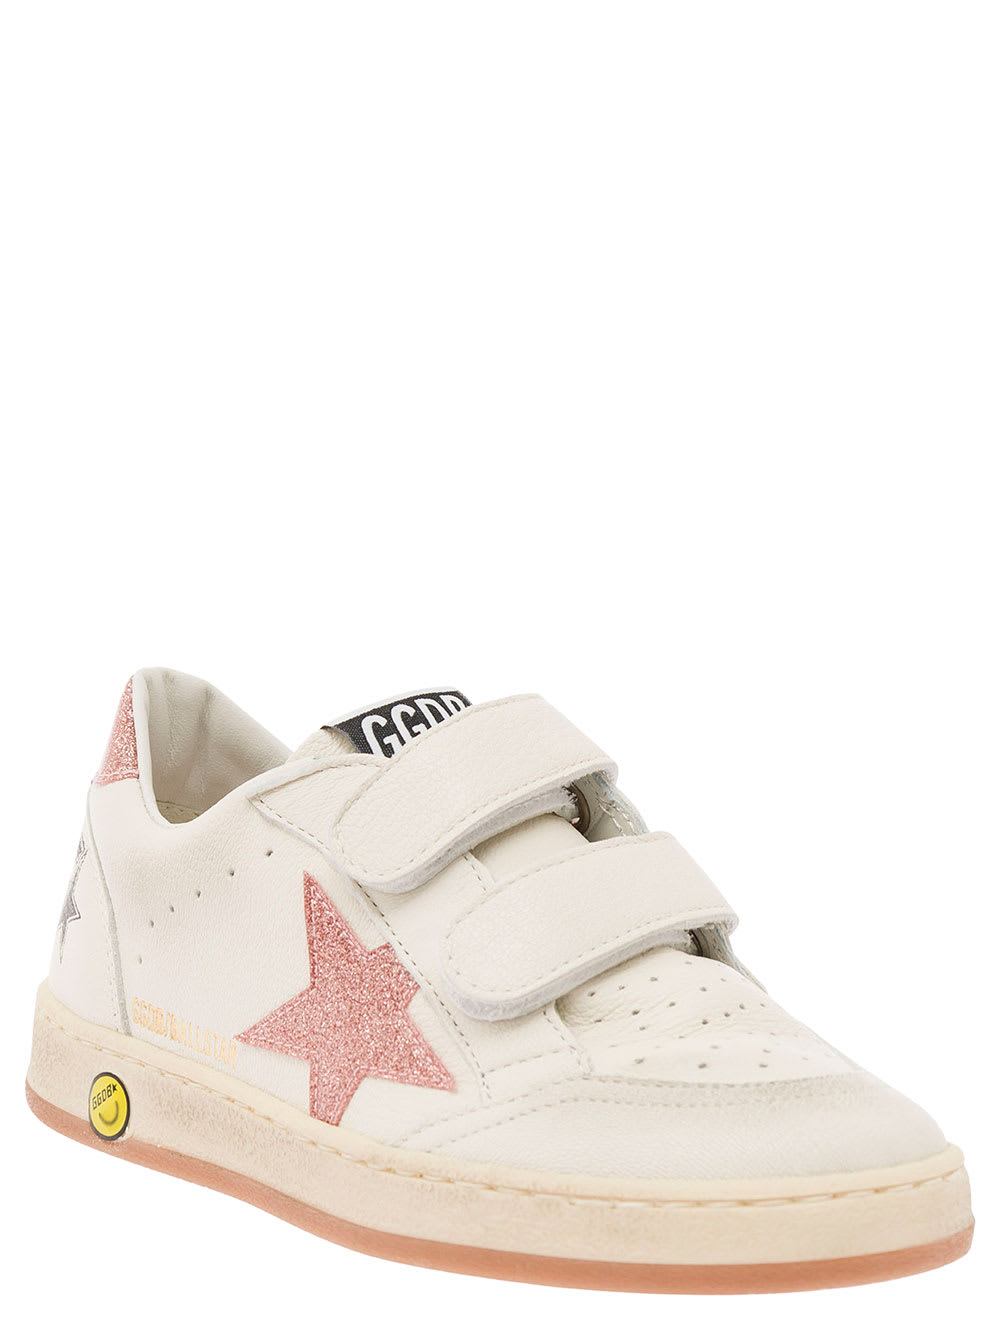 Shop Golden Goose Ball-star White Low Top Sneakers With Glitter Star In Leather Girl